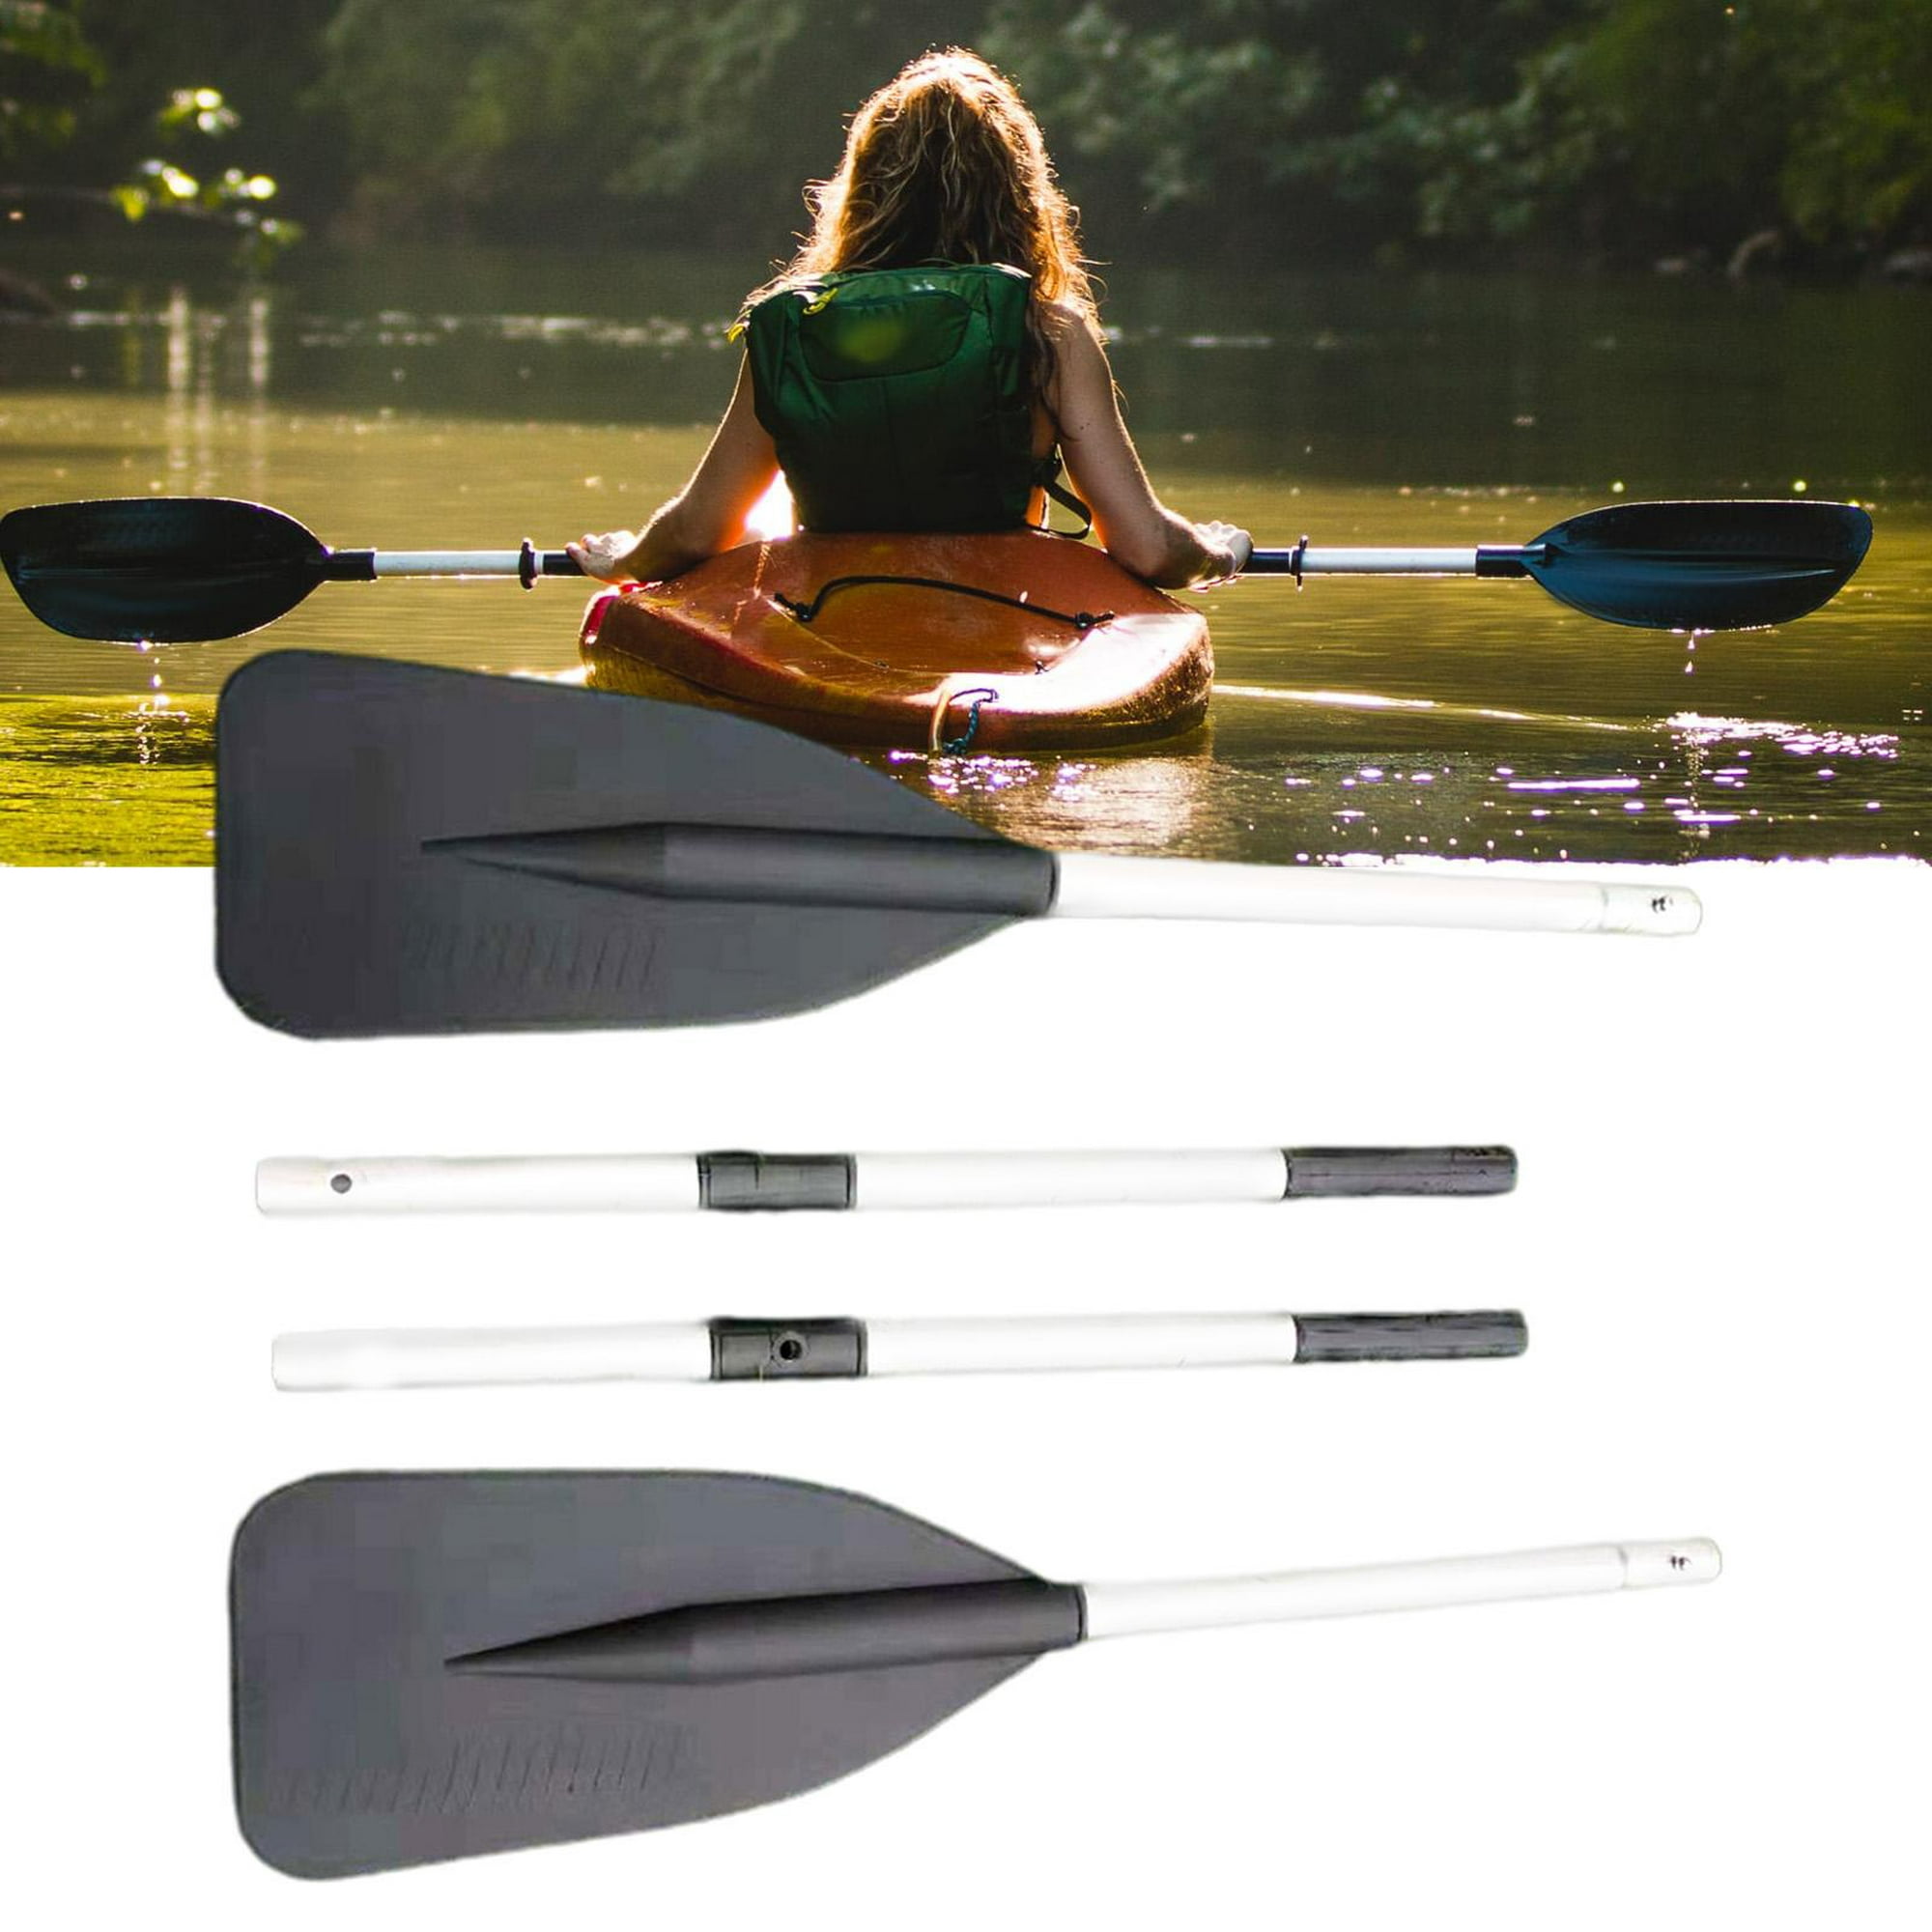 2x Extraíble Accs Portable Durable Ligero Suministros Packable para Stand  up Boat Surf Canoa de surf Paddle Board Negro DYNWAVEMX Remo Kayak